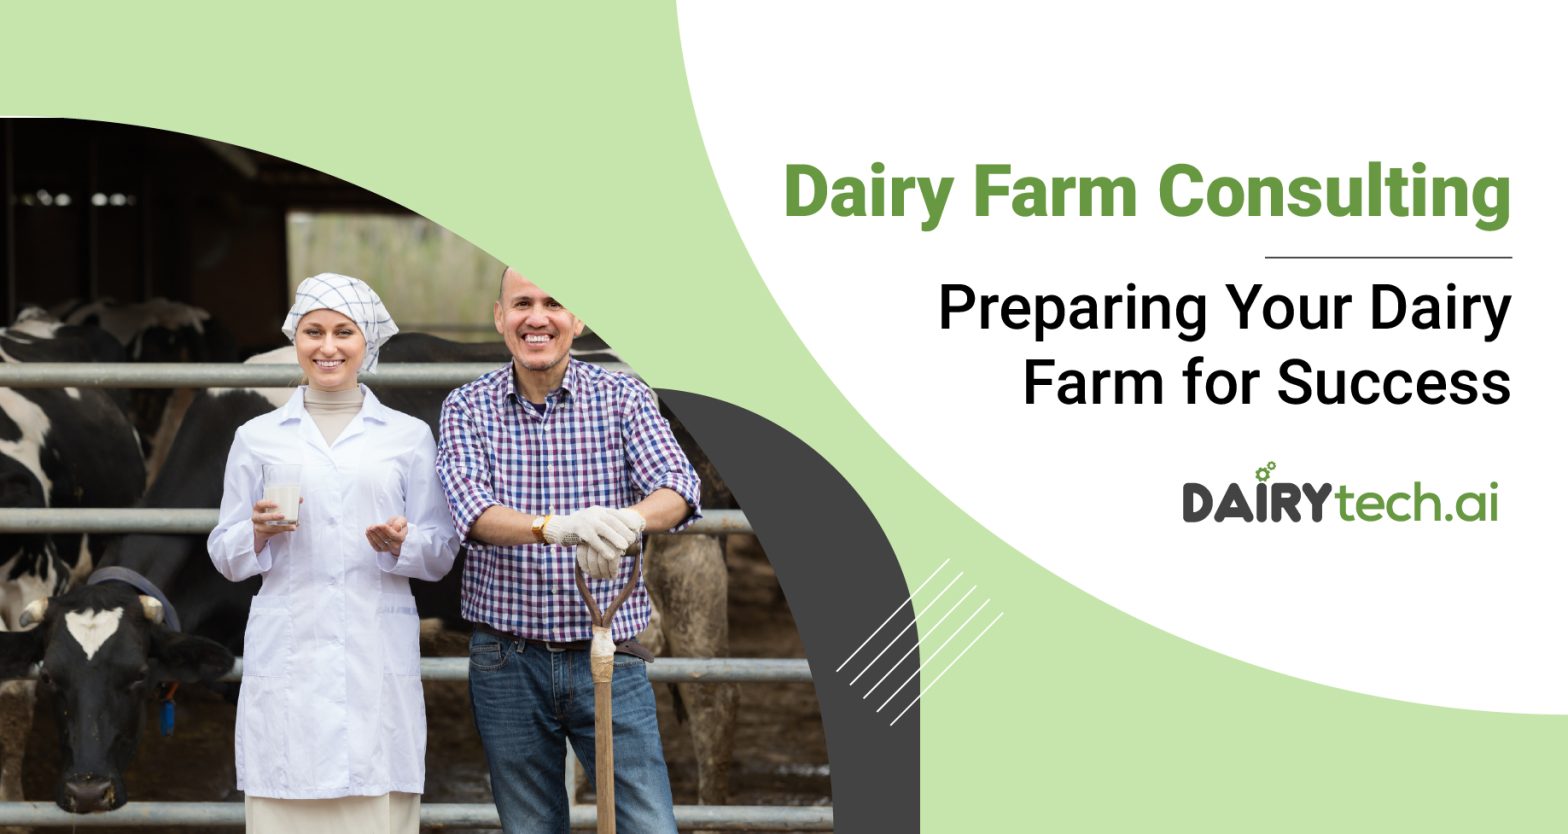 dairytechai-founded-by-ravi-garg-website-insights-dairy-farm-consulting-preparing-your-dairy-farm-fo-100